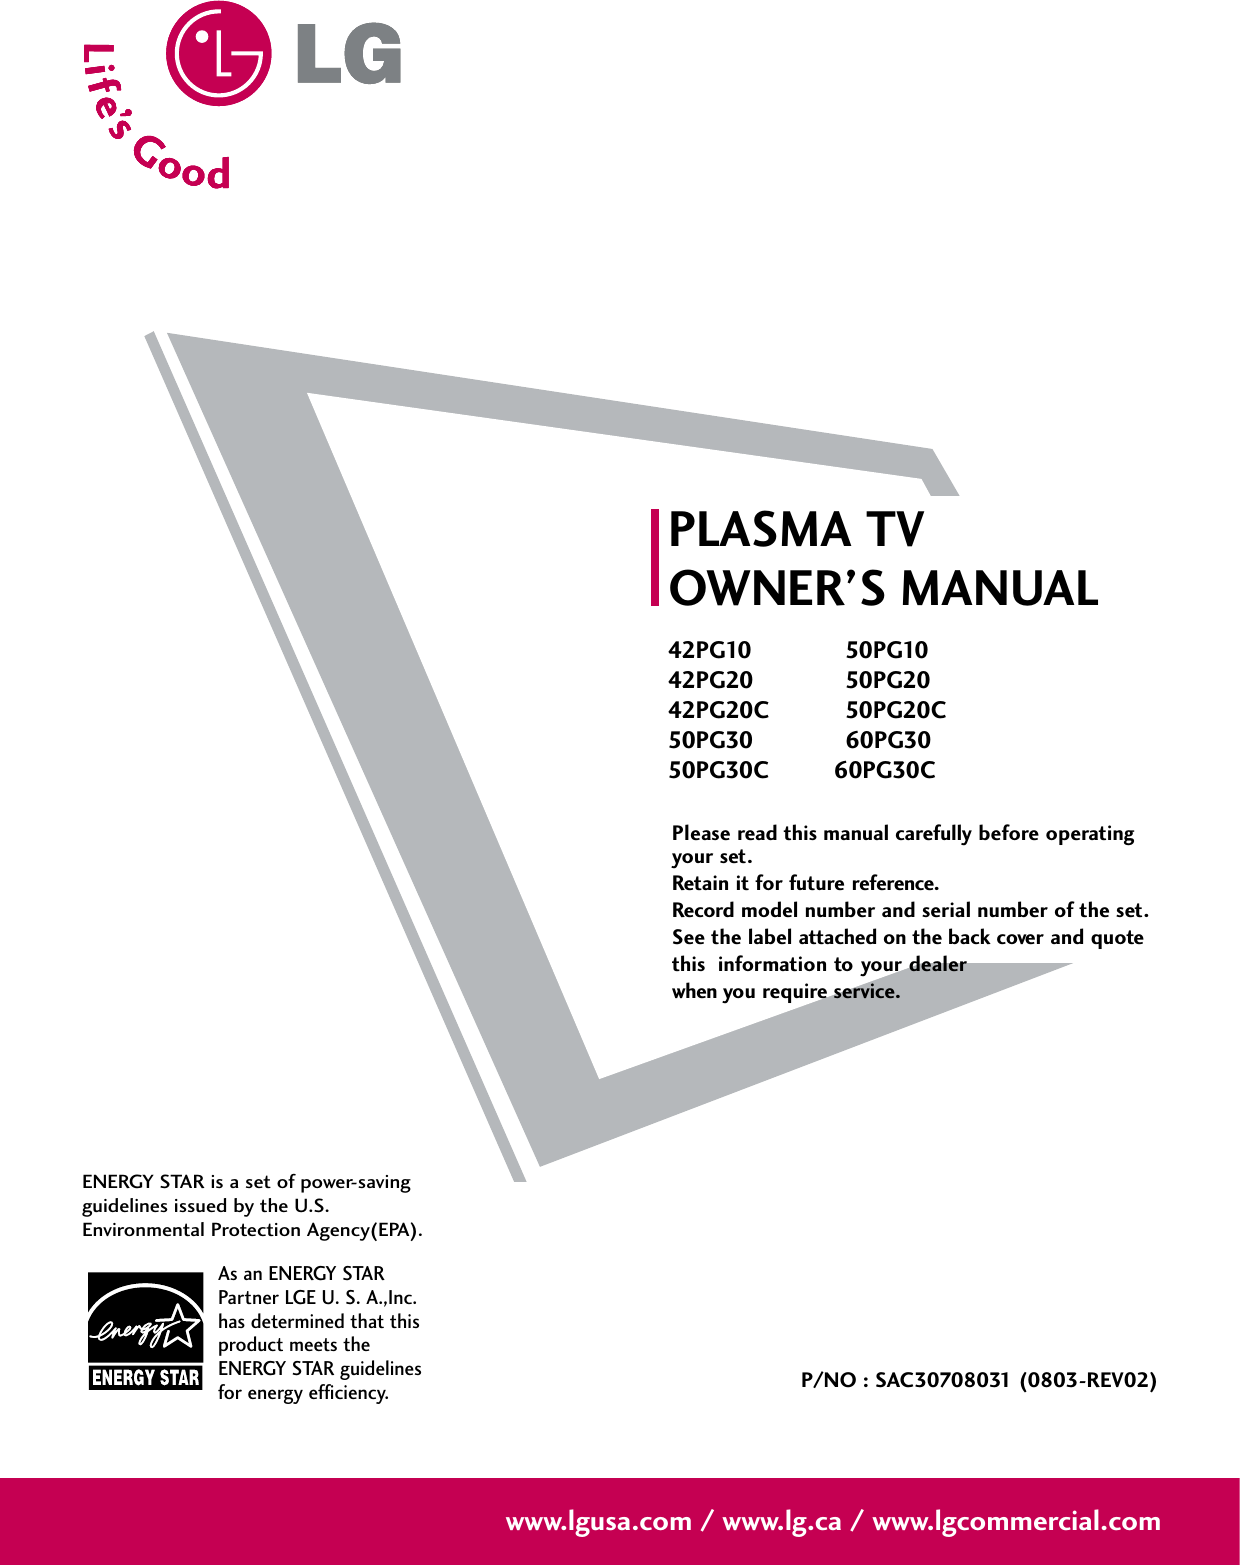 Please read this manual carefully before operatingyour set. Retain it for future reference.Record model number and serial number of the set. See the label attached on the back cover and quote this  information to your dealer when you require service.PLASMA TVOWNER’S MANUAL42PG10 50PG1042PG20 50PG2042PG20C 50PG20C50PG30 60PG3050PG30C60PG30CP/NO : SAC30708031 (0803-REV02)www.lgusa.com / www.lg.ca / www.lgcommercial.comAs an ENERGY STARPartner LGE U. S. A.,Inc.has determined that thisproduct meets theENERGY STAR guidelinesfor energy efficiency.ENERGY STAR is a set of power-savingguidelines issued by the U.S.Environmental Protection Agency(EPA).